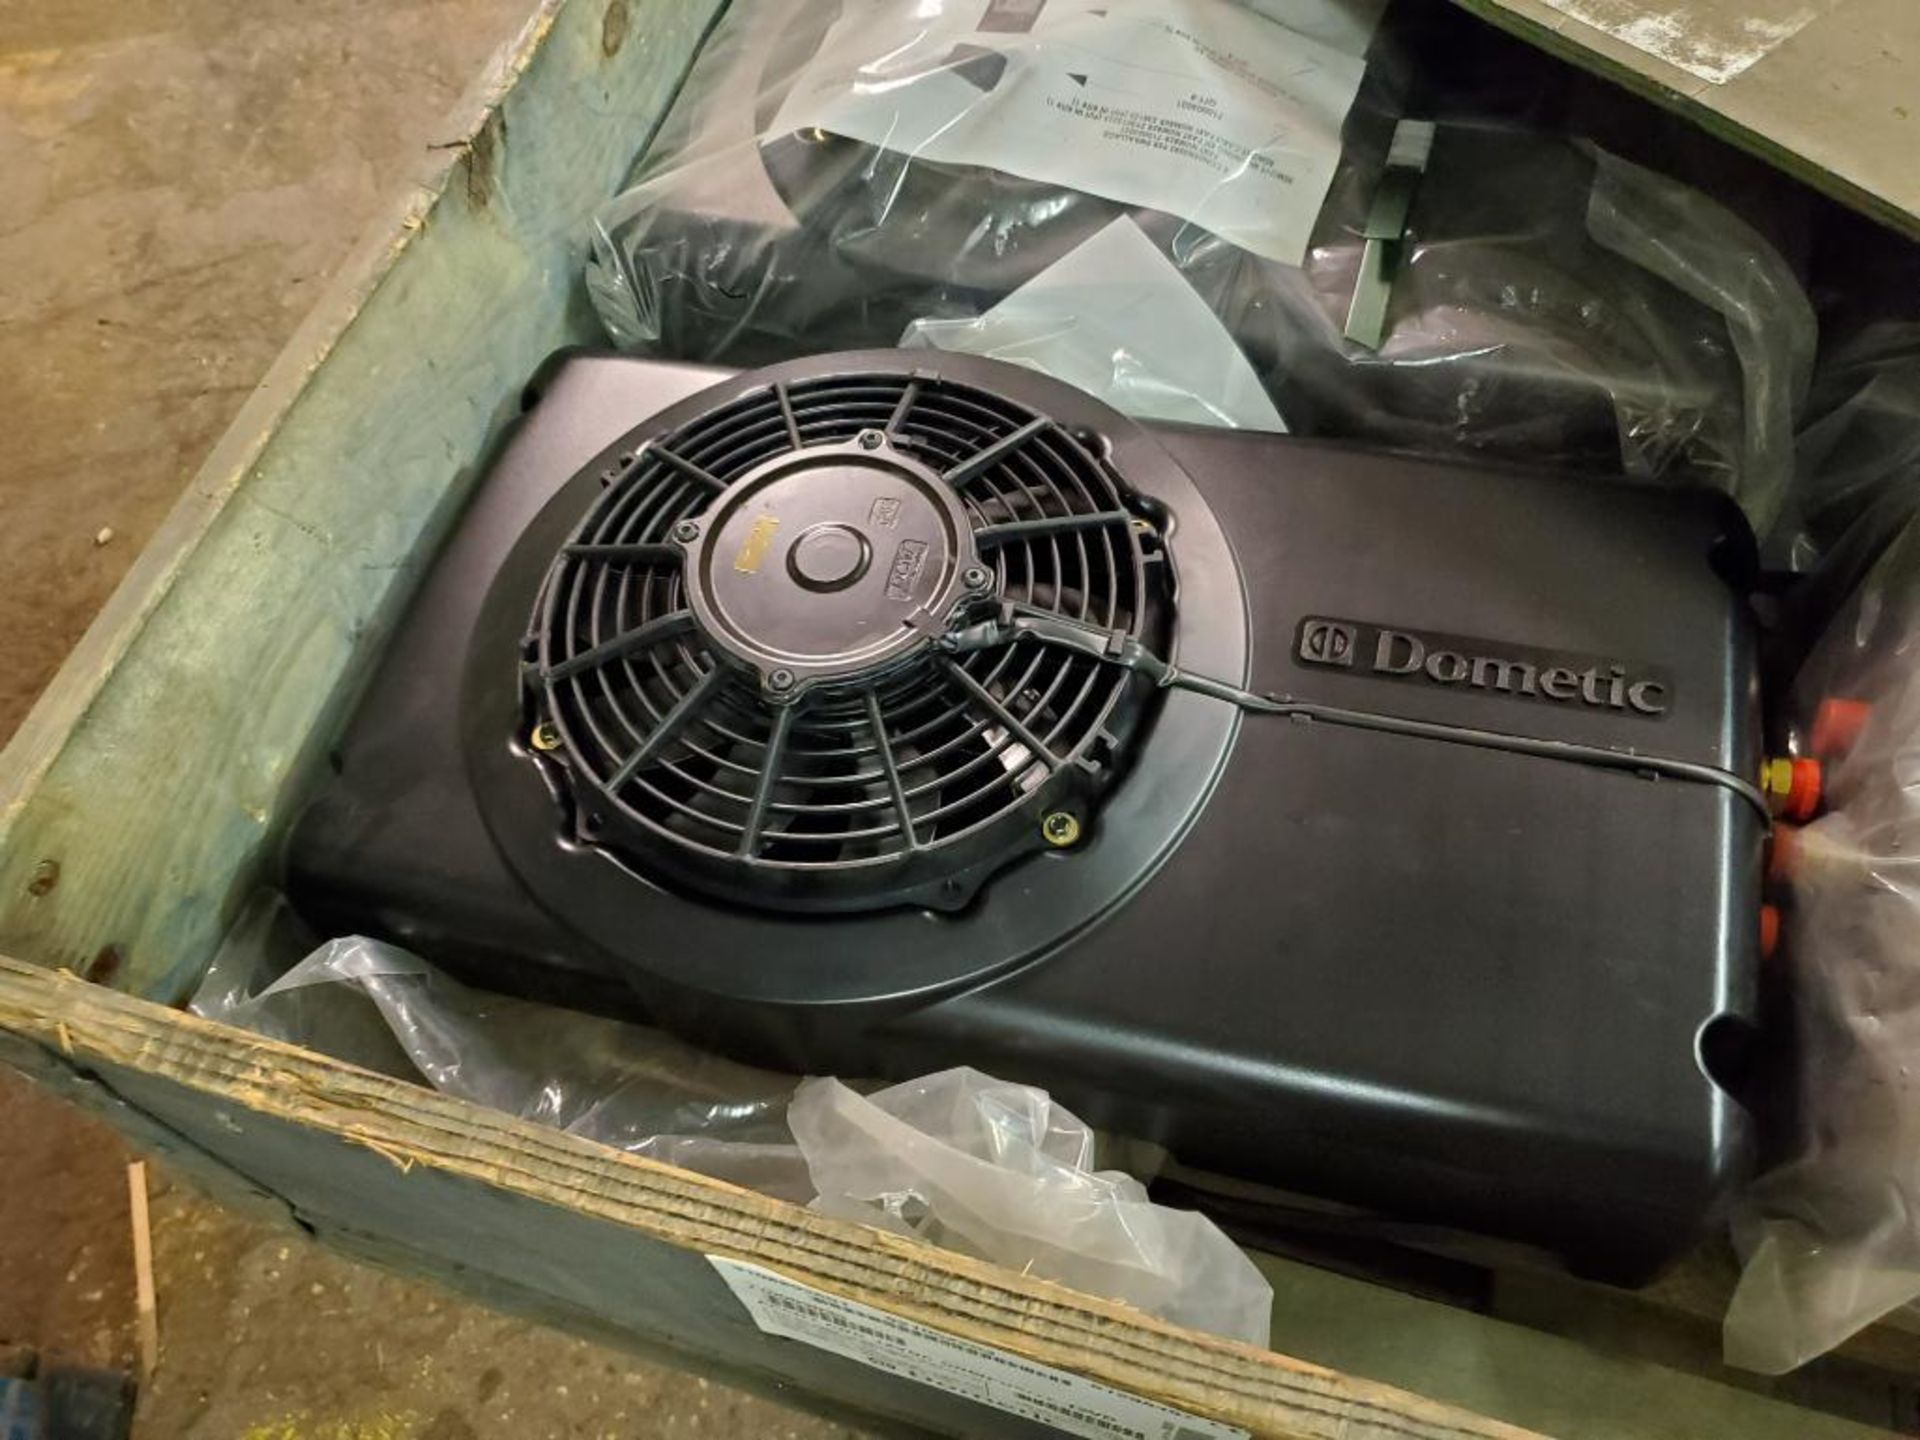 Qty 4 - Dometic 12 volt ACCH7 condensing AC unit. Part of Blizzard Turbo system. New in bulk crate.